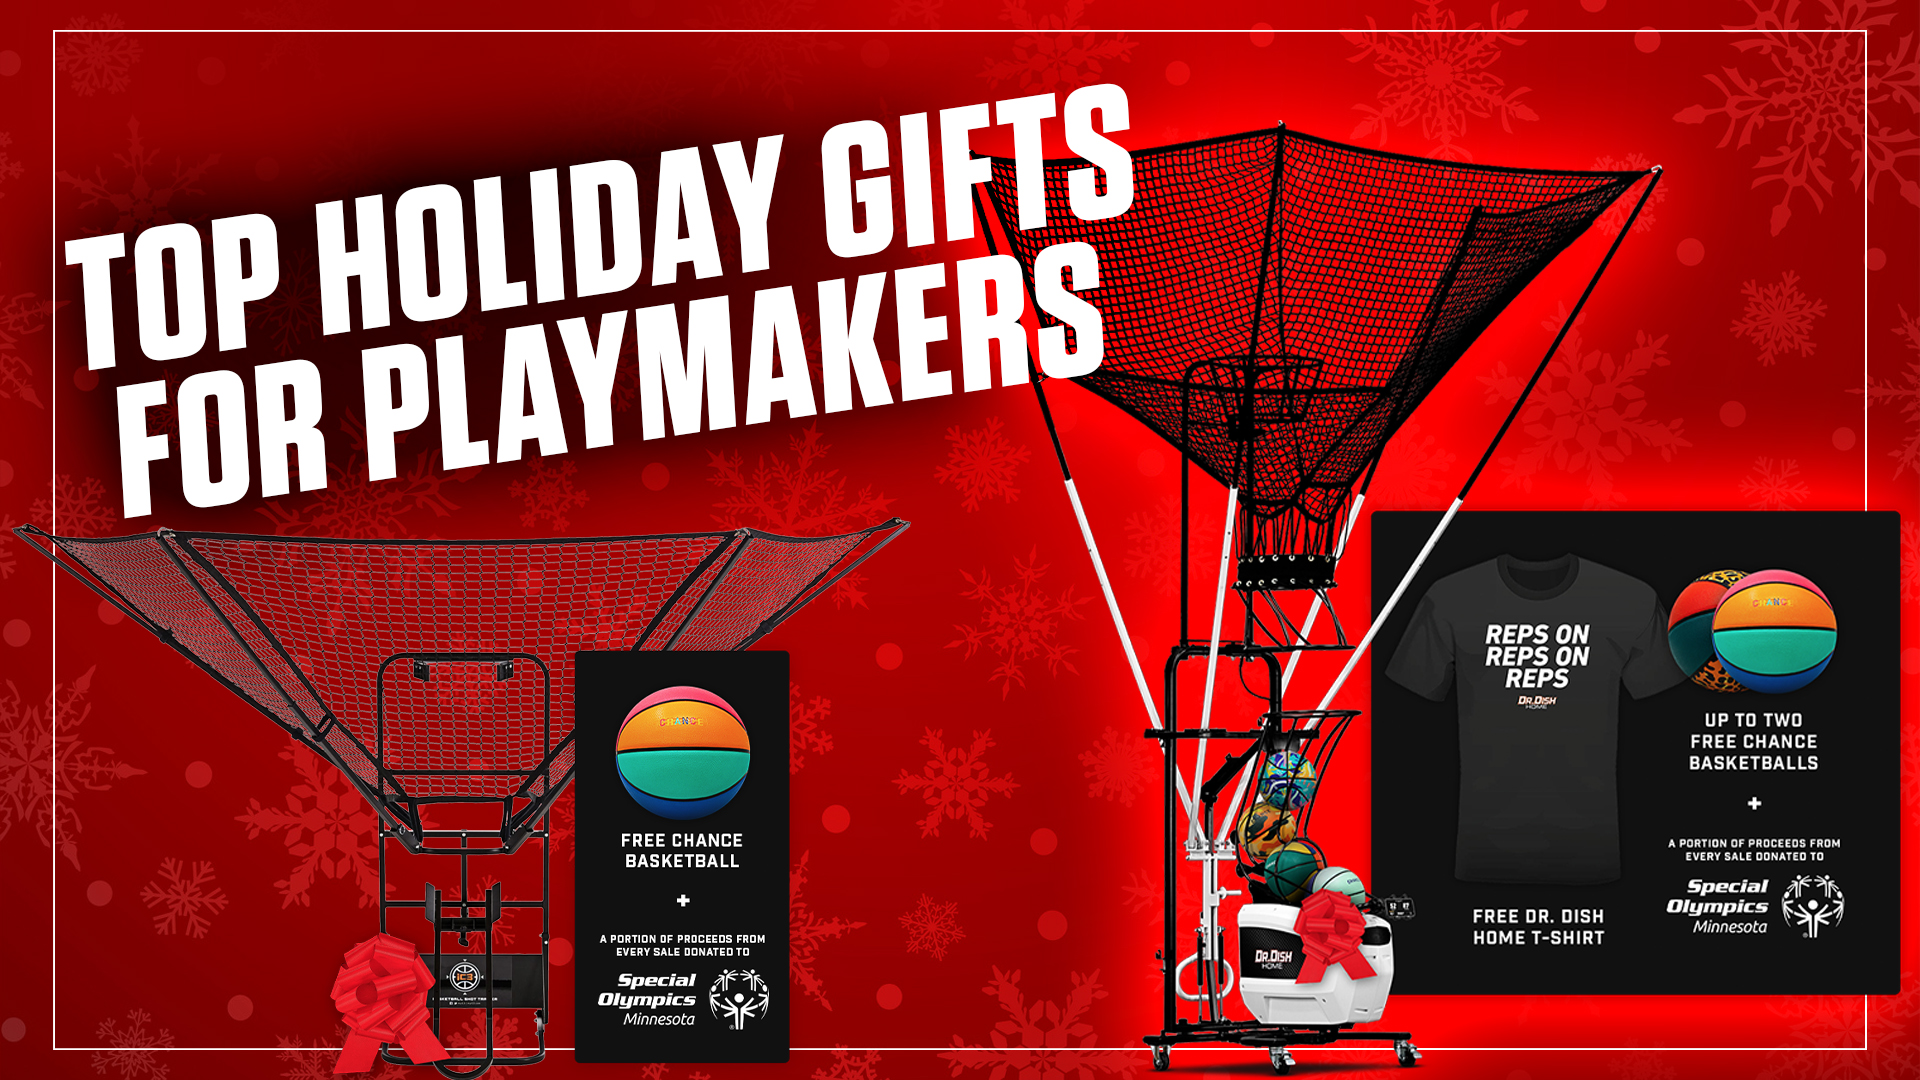 Top Holiday Gifts For Playmakers (2020)